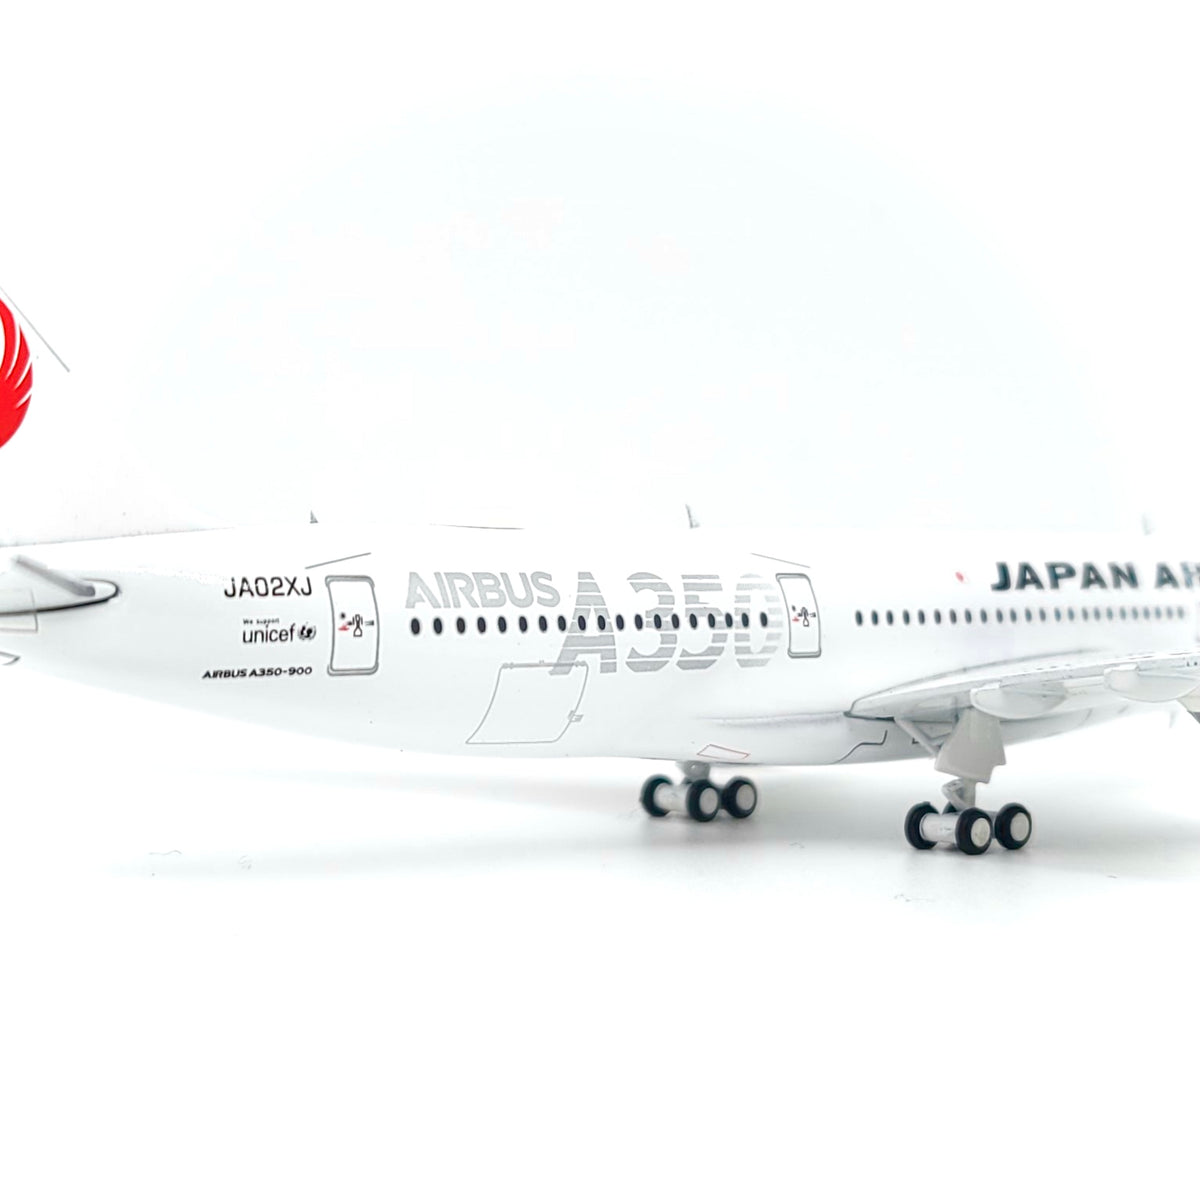 1/400 Japan Airlines Airbus A350-900 (JA02XJ)